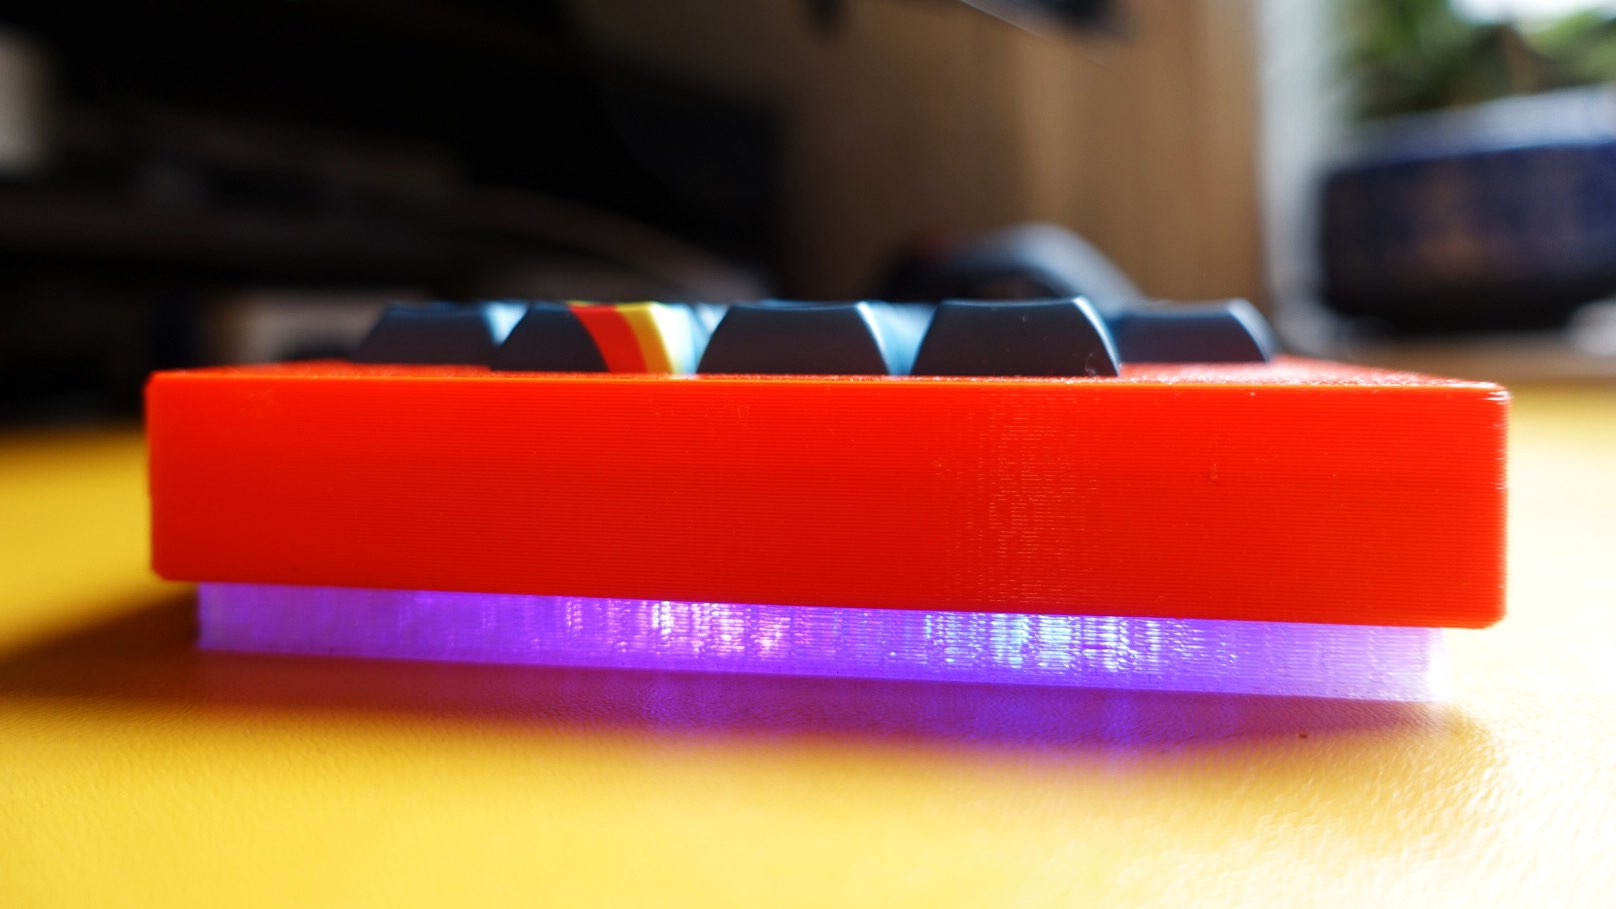 Side profile of V4N² with a red top installed. Underglow from the Monorail PCB is visible through the clear 3D printed bottom piece.